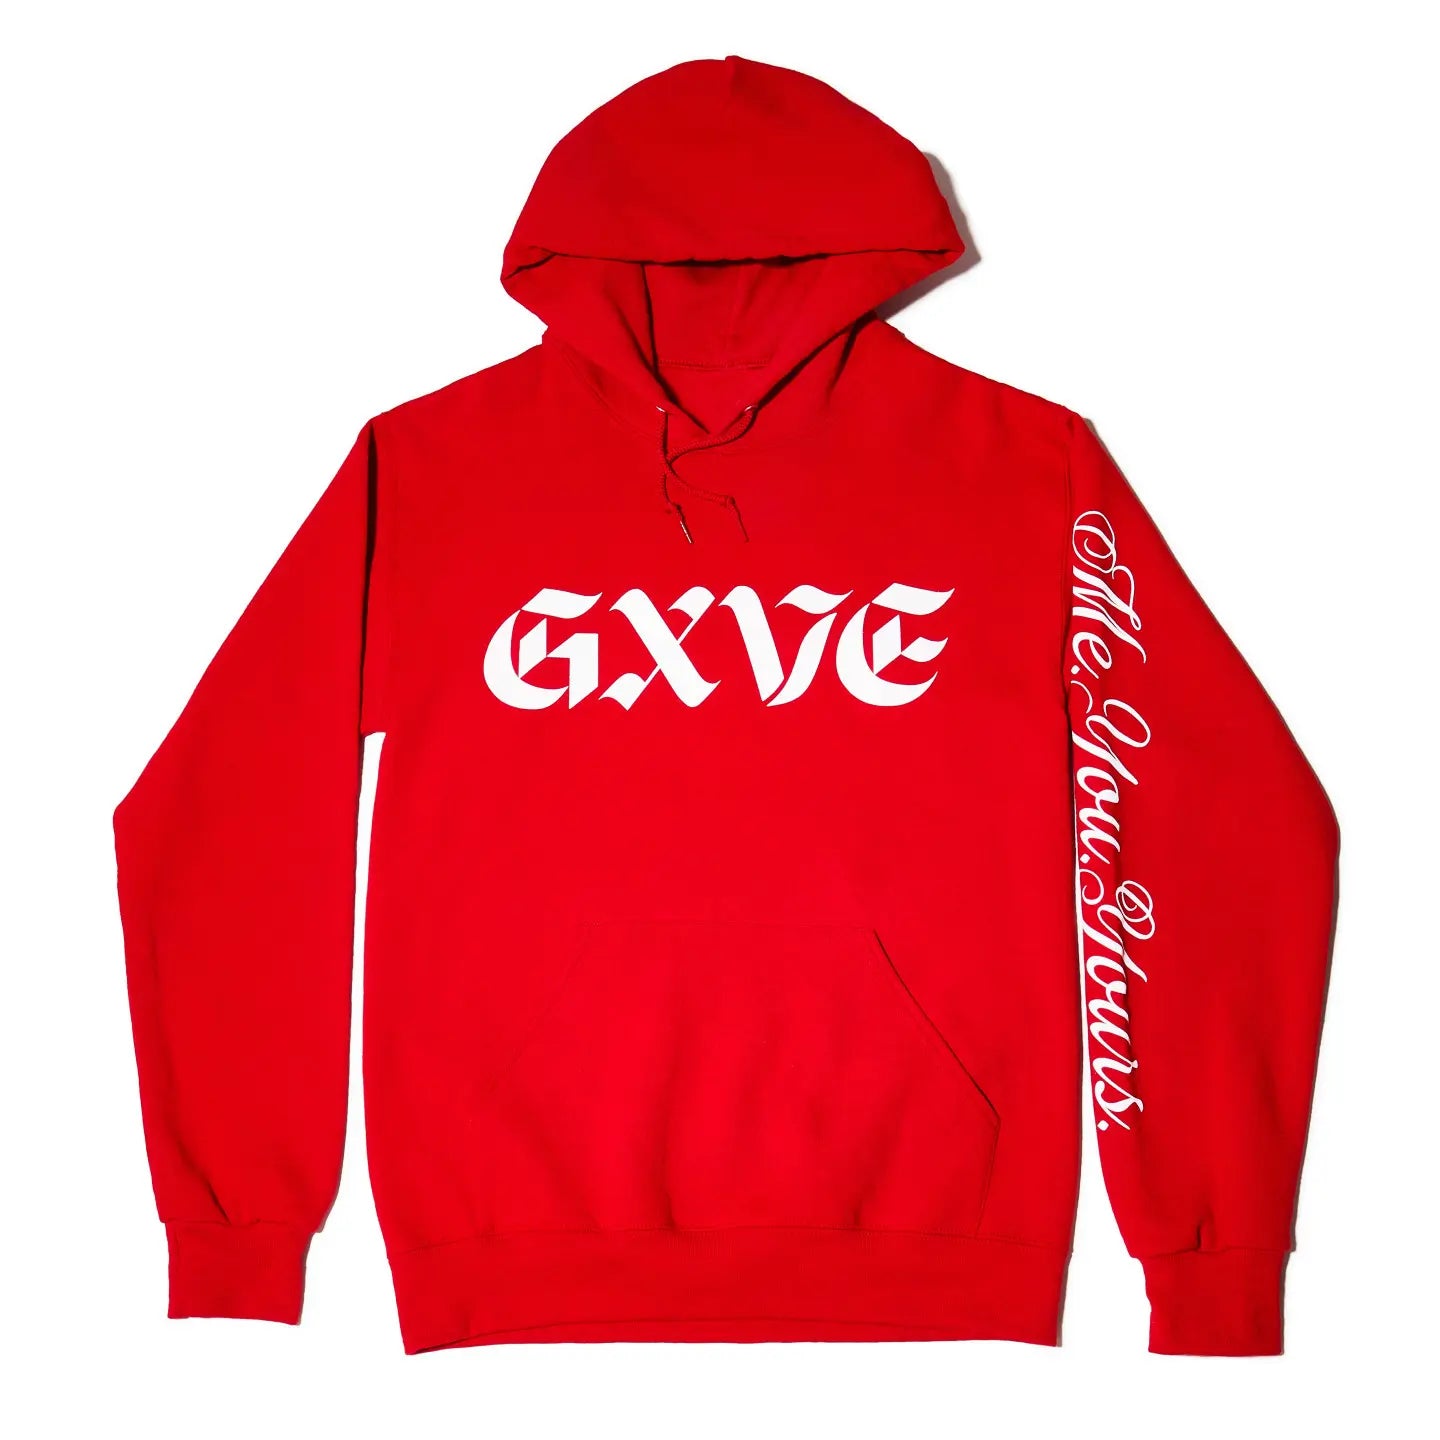 GXVE GXVE RED HOODIE - GXVE custom artwork designed & printed in white on a pullover hoodie in Gwen’s signature GXVE ‘red.’ Made of 50% cotton and 50% polyester.